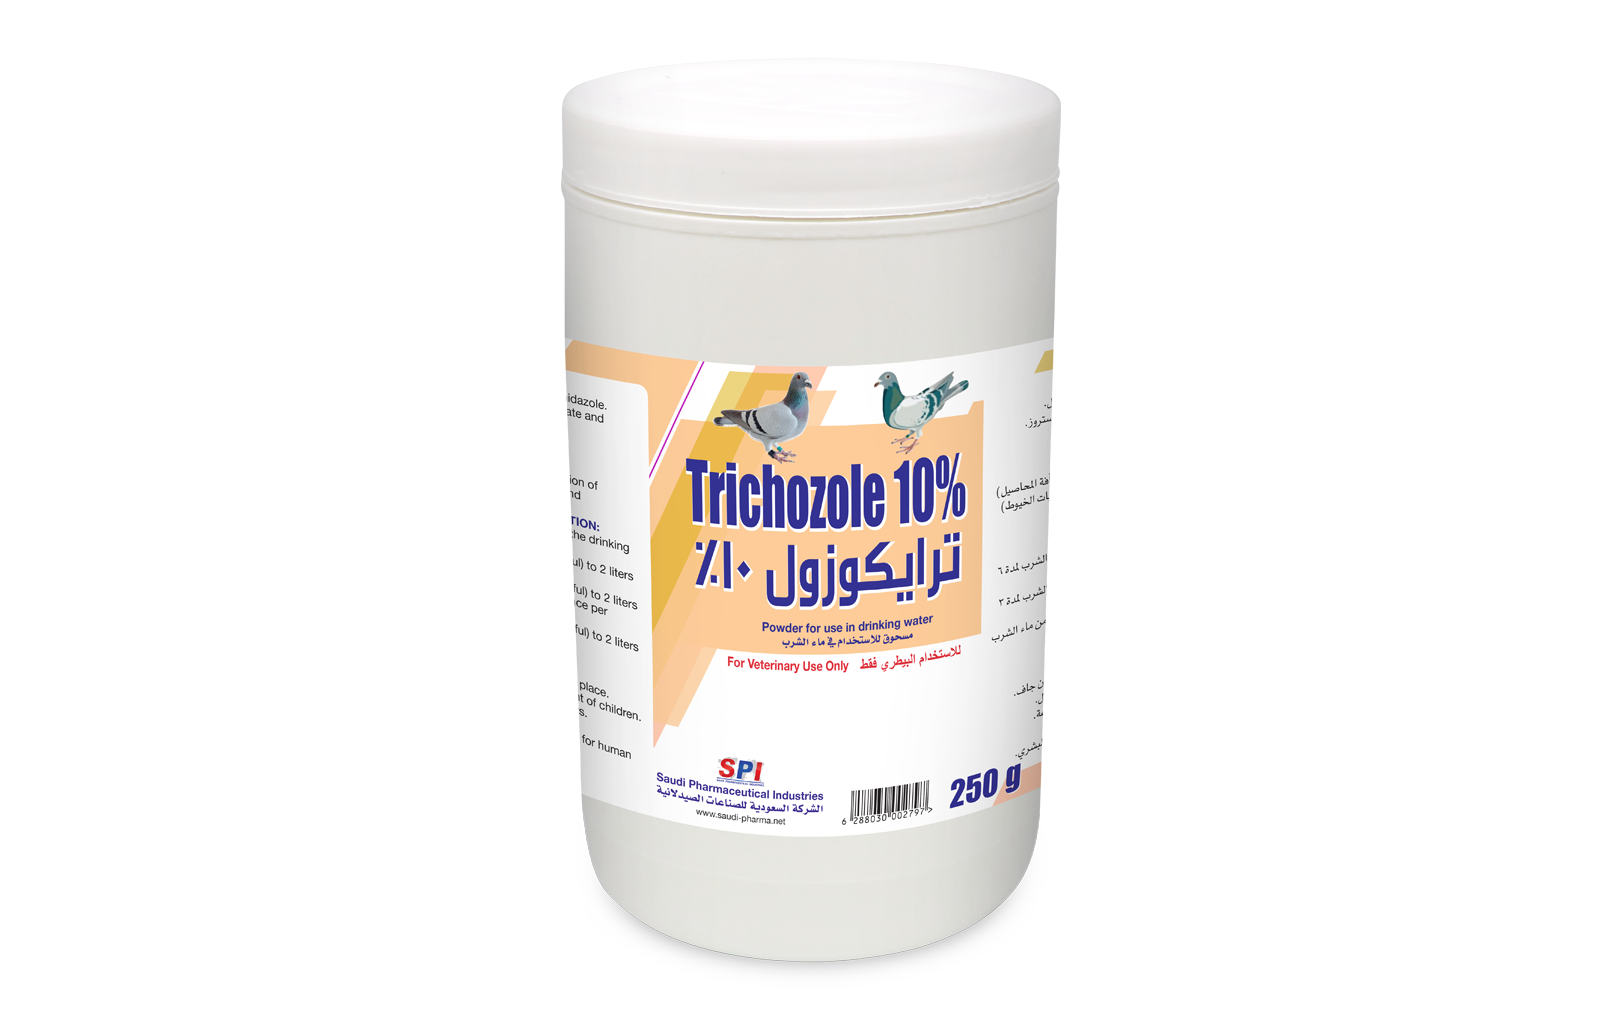 Trichozole 10% Powder for Use in Drinking Water (250 g)